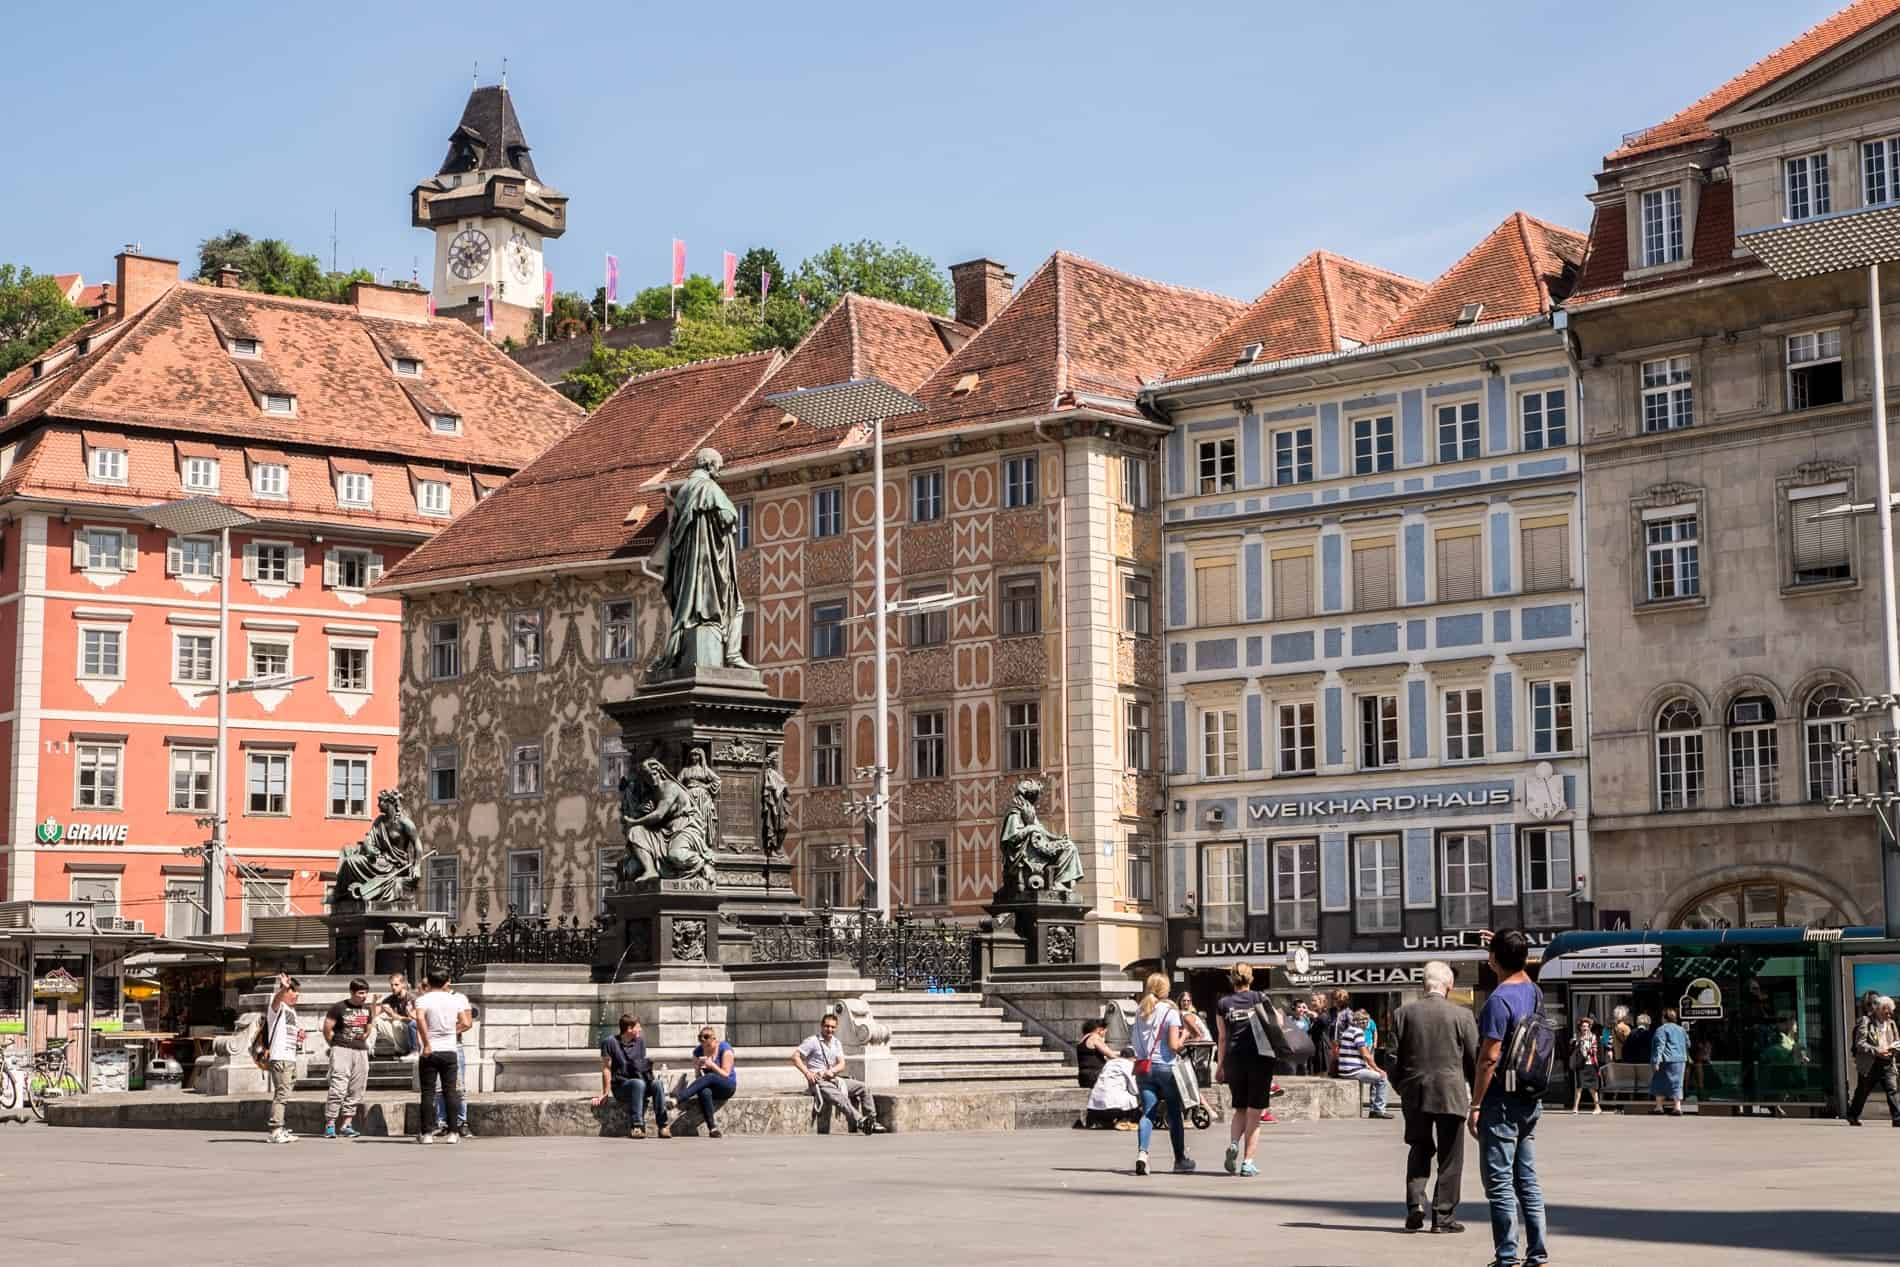 The old town square of Graz Hauptplatz with statues, coloured buildings and a view to the clock tower on the hill. 